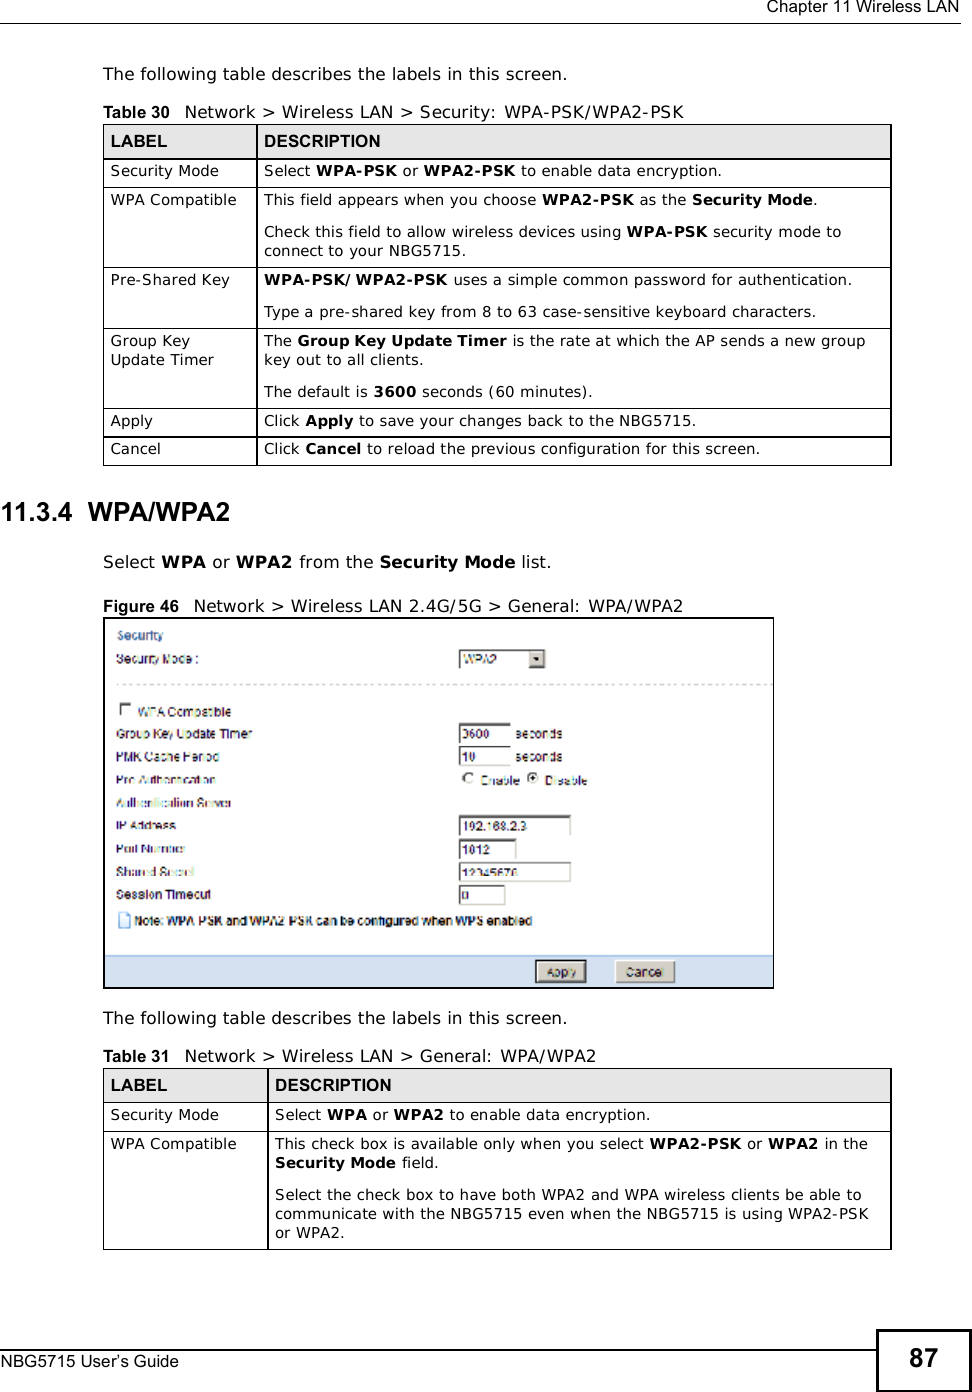  Chapter 11Wireless LANNBG5715 User’s Guide 87The following table describes the labels in this screen.11.3.4  WPA/WPA2Select WPA or WPA2 from the Security Mode list.Figure 46   Network &gt; Wireless LAN 2.4G/5G &gt; General: WPA/WPA2The following table describes the labels in this screen.Table 30   Network &gt; Wireless LAN &gt; Security: WPA-PSK/WPA2-PSKLABEL DESCRIPTIONSecurity Mode Select WPA-PSK or WPA2-PSK to enable data encryption.WPA Compatible This field appears when you choose WPA2-PSK as the Security Mode.Check this field to allow wireless devices using WPA-PSK security mode to connect to your NBG5715.Pre-Shared Key  WPA-PSK/WPA2-PSK uses a simple common password for authentication.Type a pre-shared key from 8 to 63 case-sensitive keyboard characters.Group Key Update Timer The Group Key Update Timer is the rate at which the AP sends a new group key out to all clients. The default is 3600 seconds (60 minutes).Apply Click Apply to save your changes back to the NBG5715.Cancel Click Cancel to reload the previous configuration for this screen.Table 31   Network &gt; Wireless LAN &gt; General: WPA/WPA2LABEL DESCRIPTIONSecurity Mode Select WPA or WPA2 to enable data encryption.WPA Compatible This check box is available only when you select WPA2-PSK or WPA2 in the Security Mode field.Select the check box to have both WPA2 and WPA wireless clients be able to communicate with the NBG5715 even when the NBG5715 is using WPA2-PSK or WPA2.